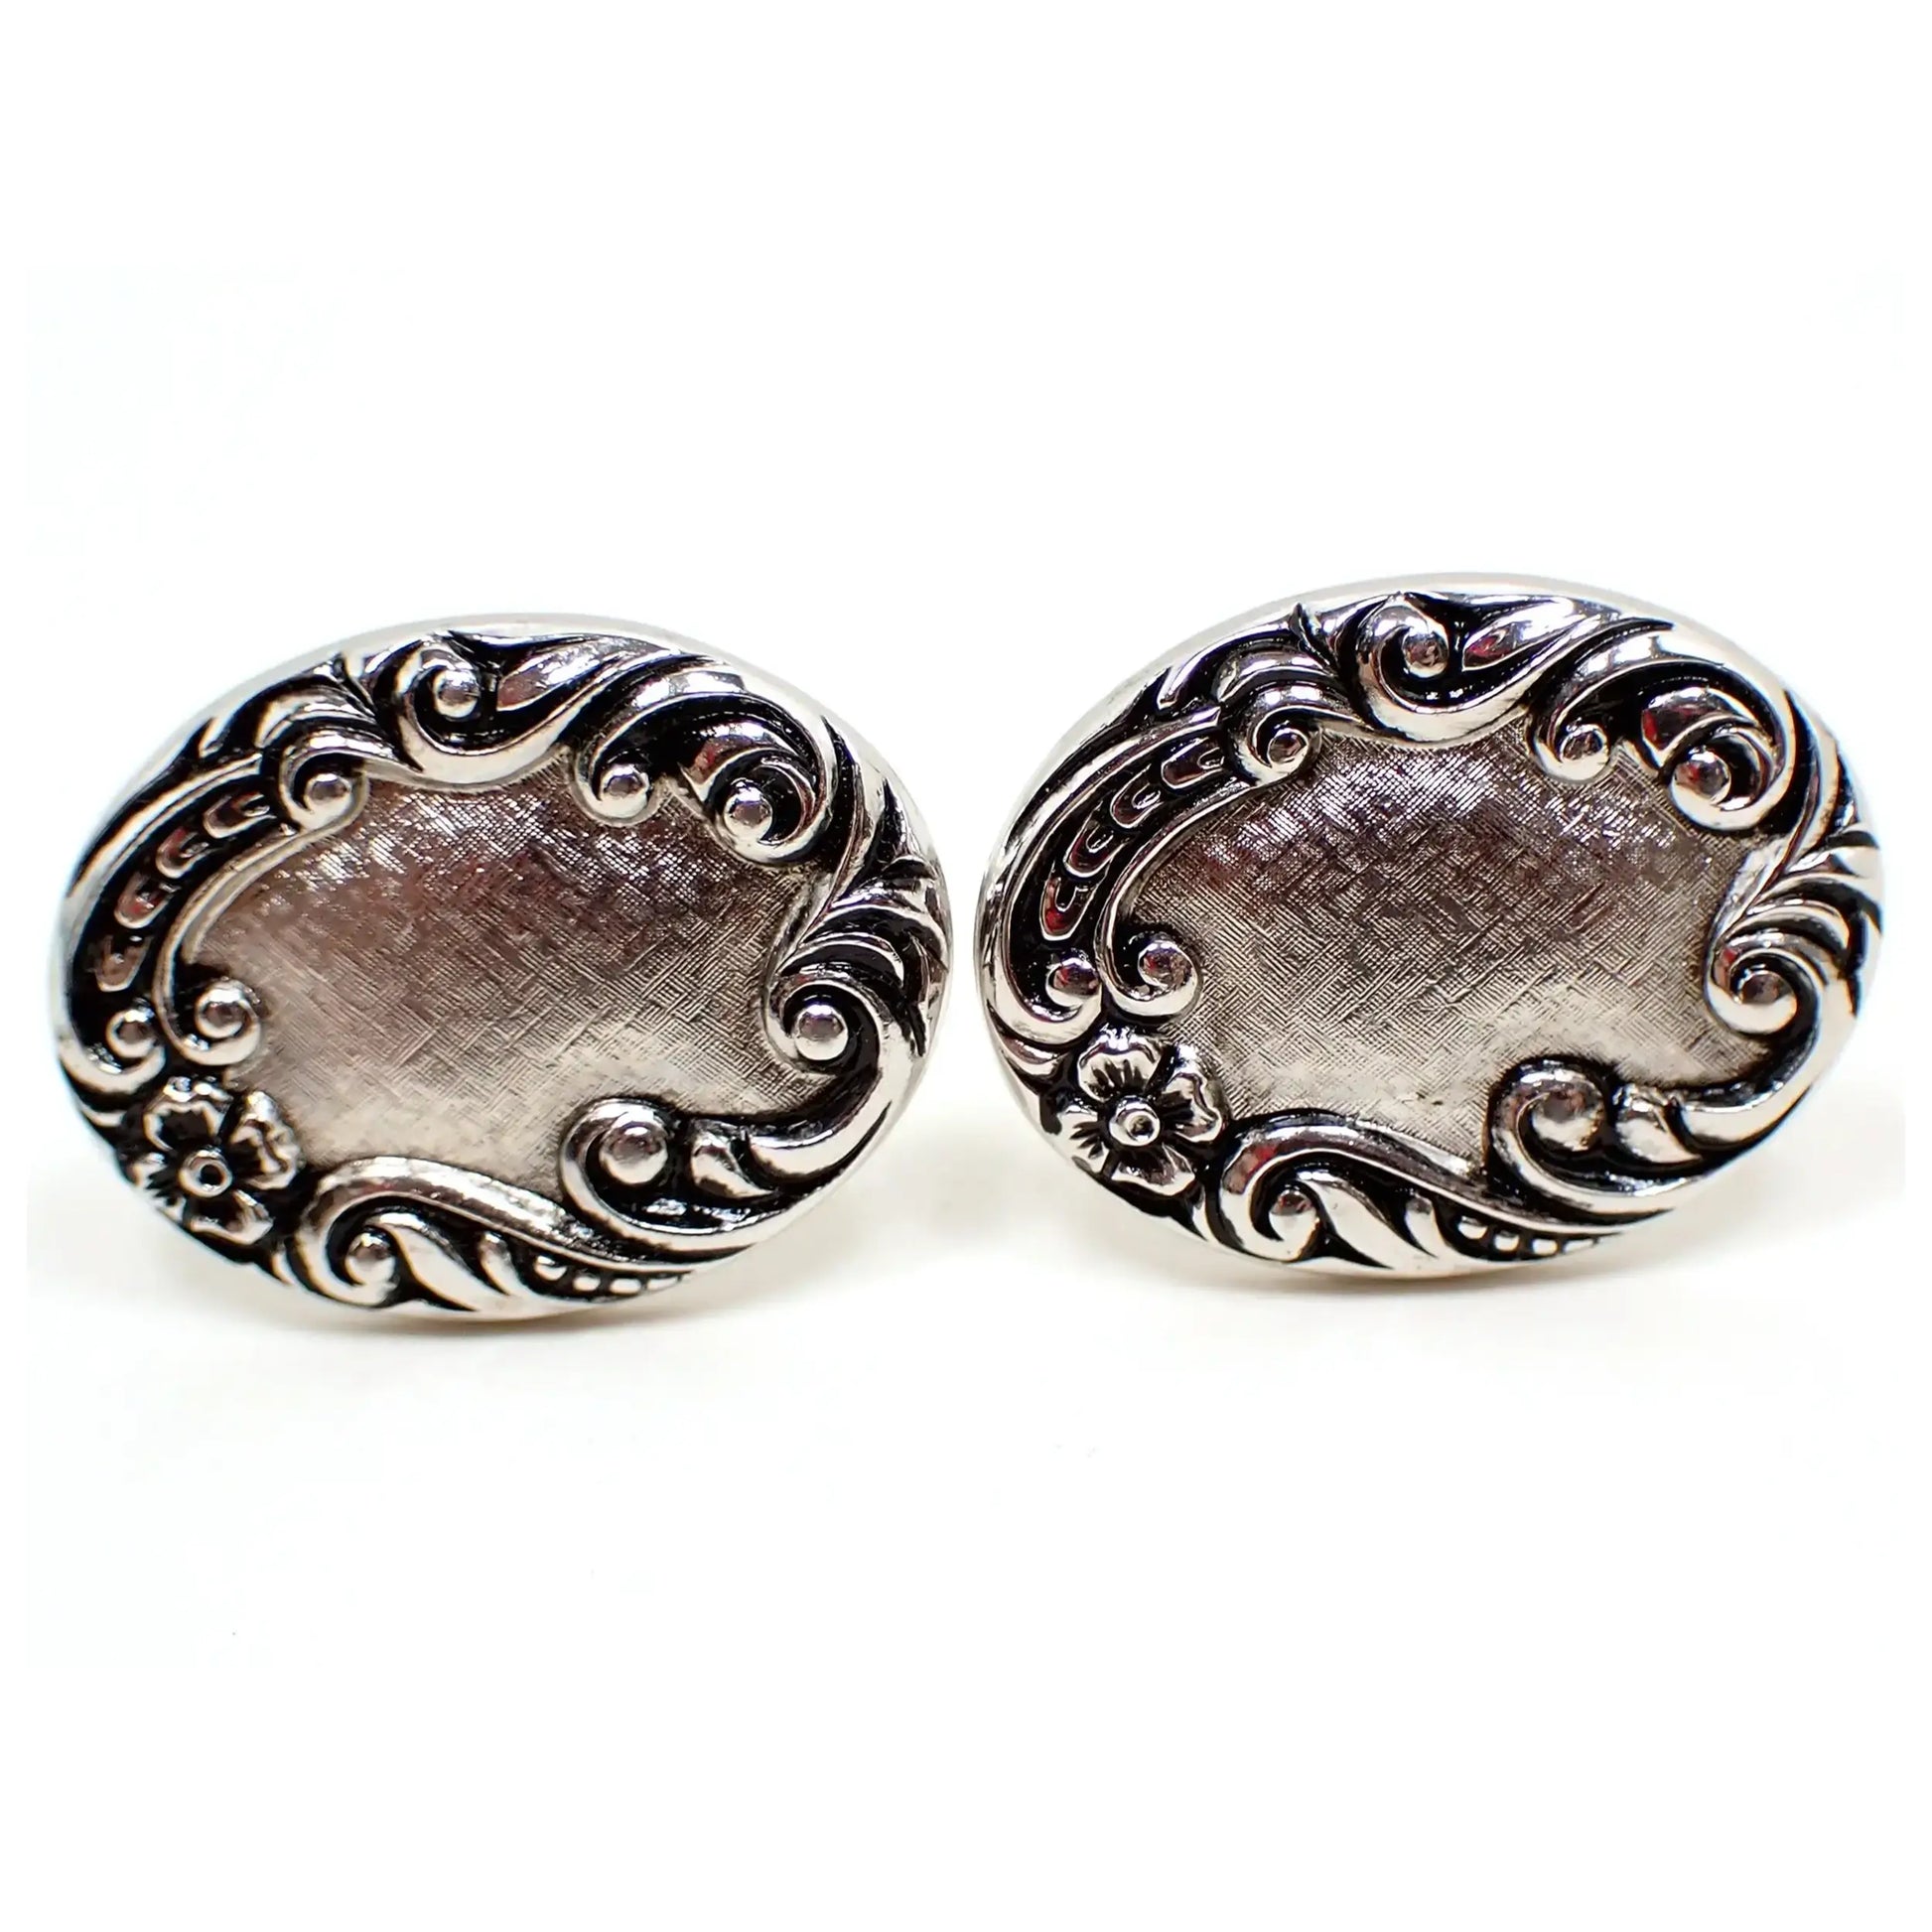 Enlarged front view of the Mid Century vintage Sarah Coventry cufflinks. The metal is antiqued silver tone in color. They have a brush textured front on the oval shapes, and have a scroll design with curls and a small flower around the edge.